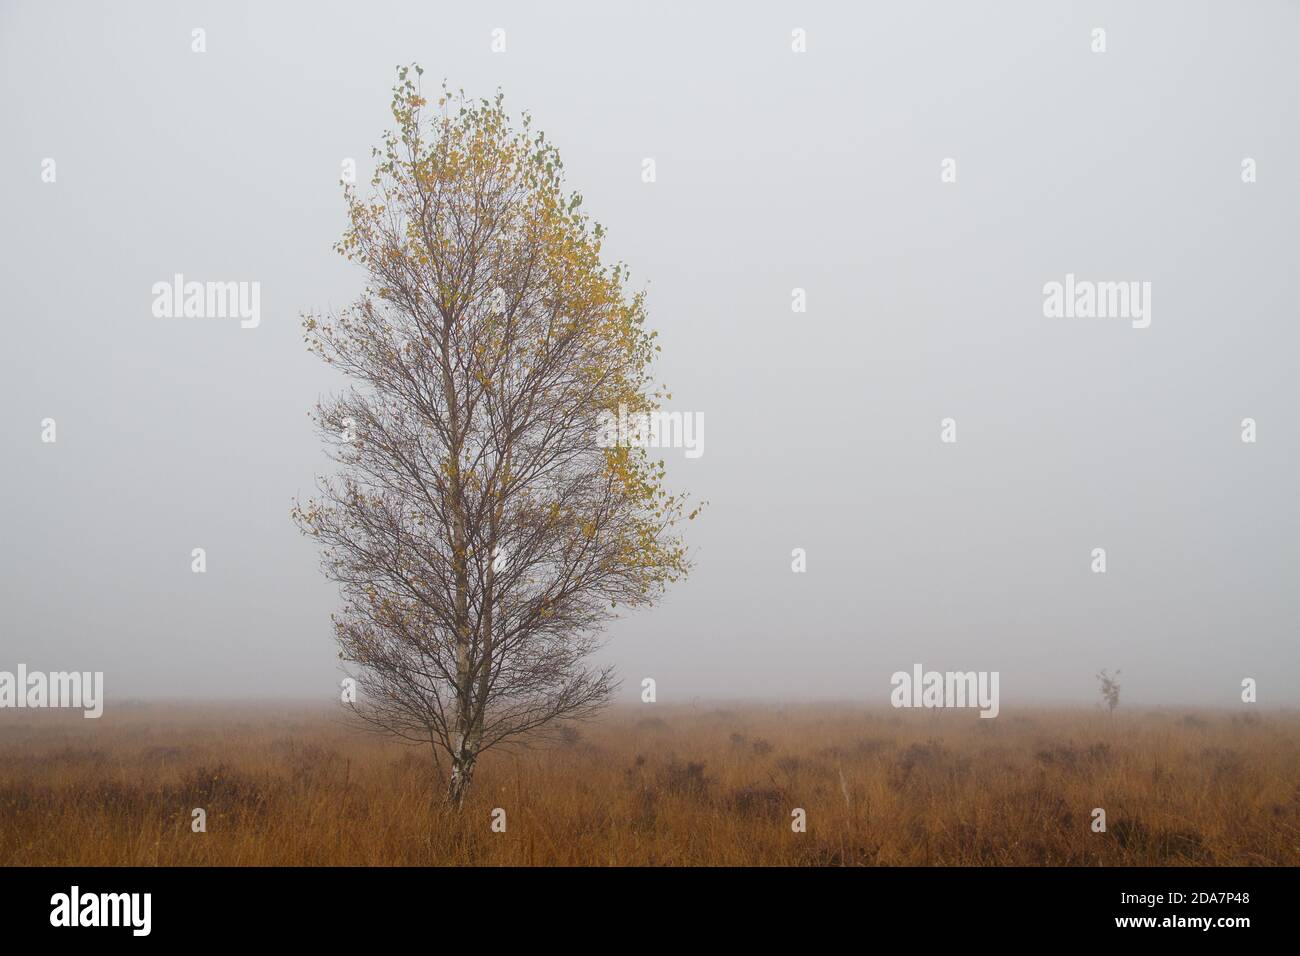 Birch tree in beautiful autumn colors on a field with Purple moor grass on a misty day Stock Photo